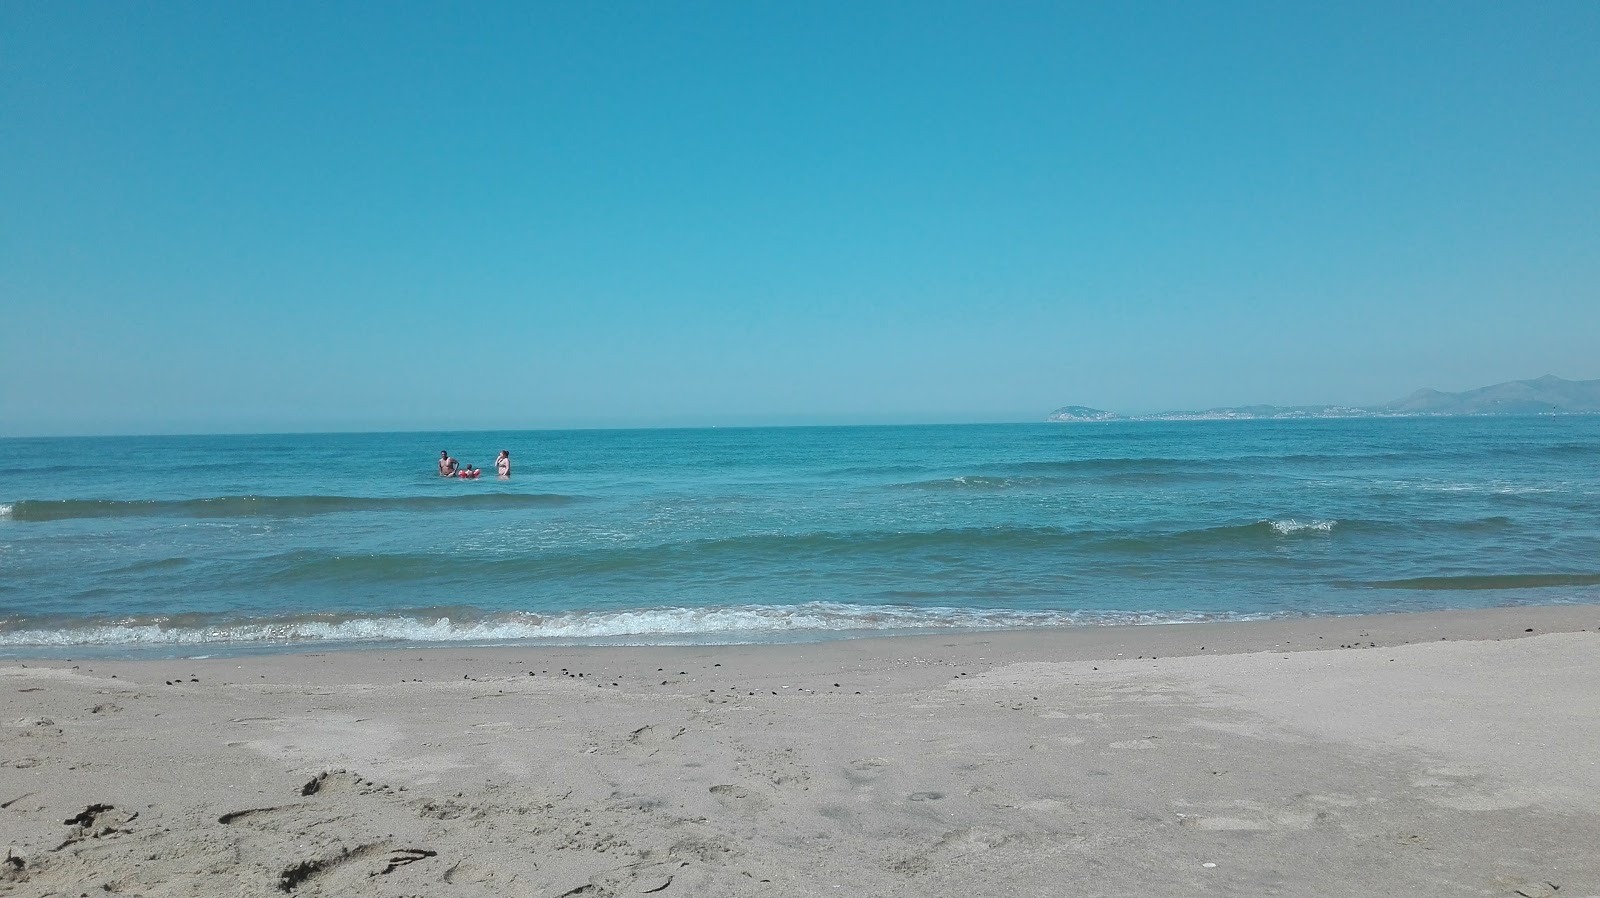 Photo of Marina di Minturno beach - popular place among relax connoisseurs